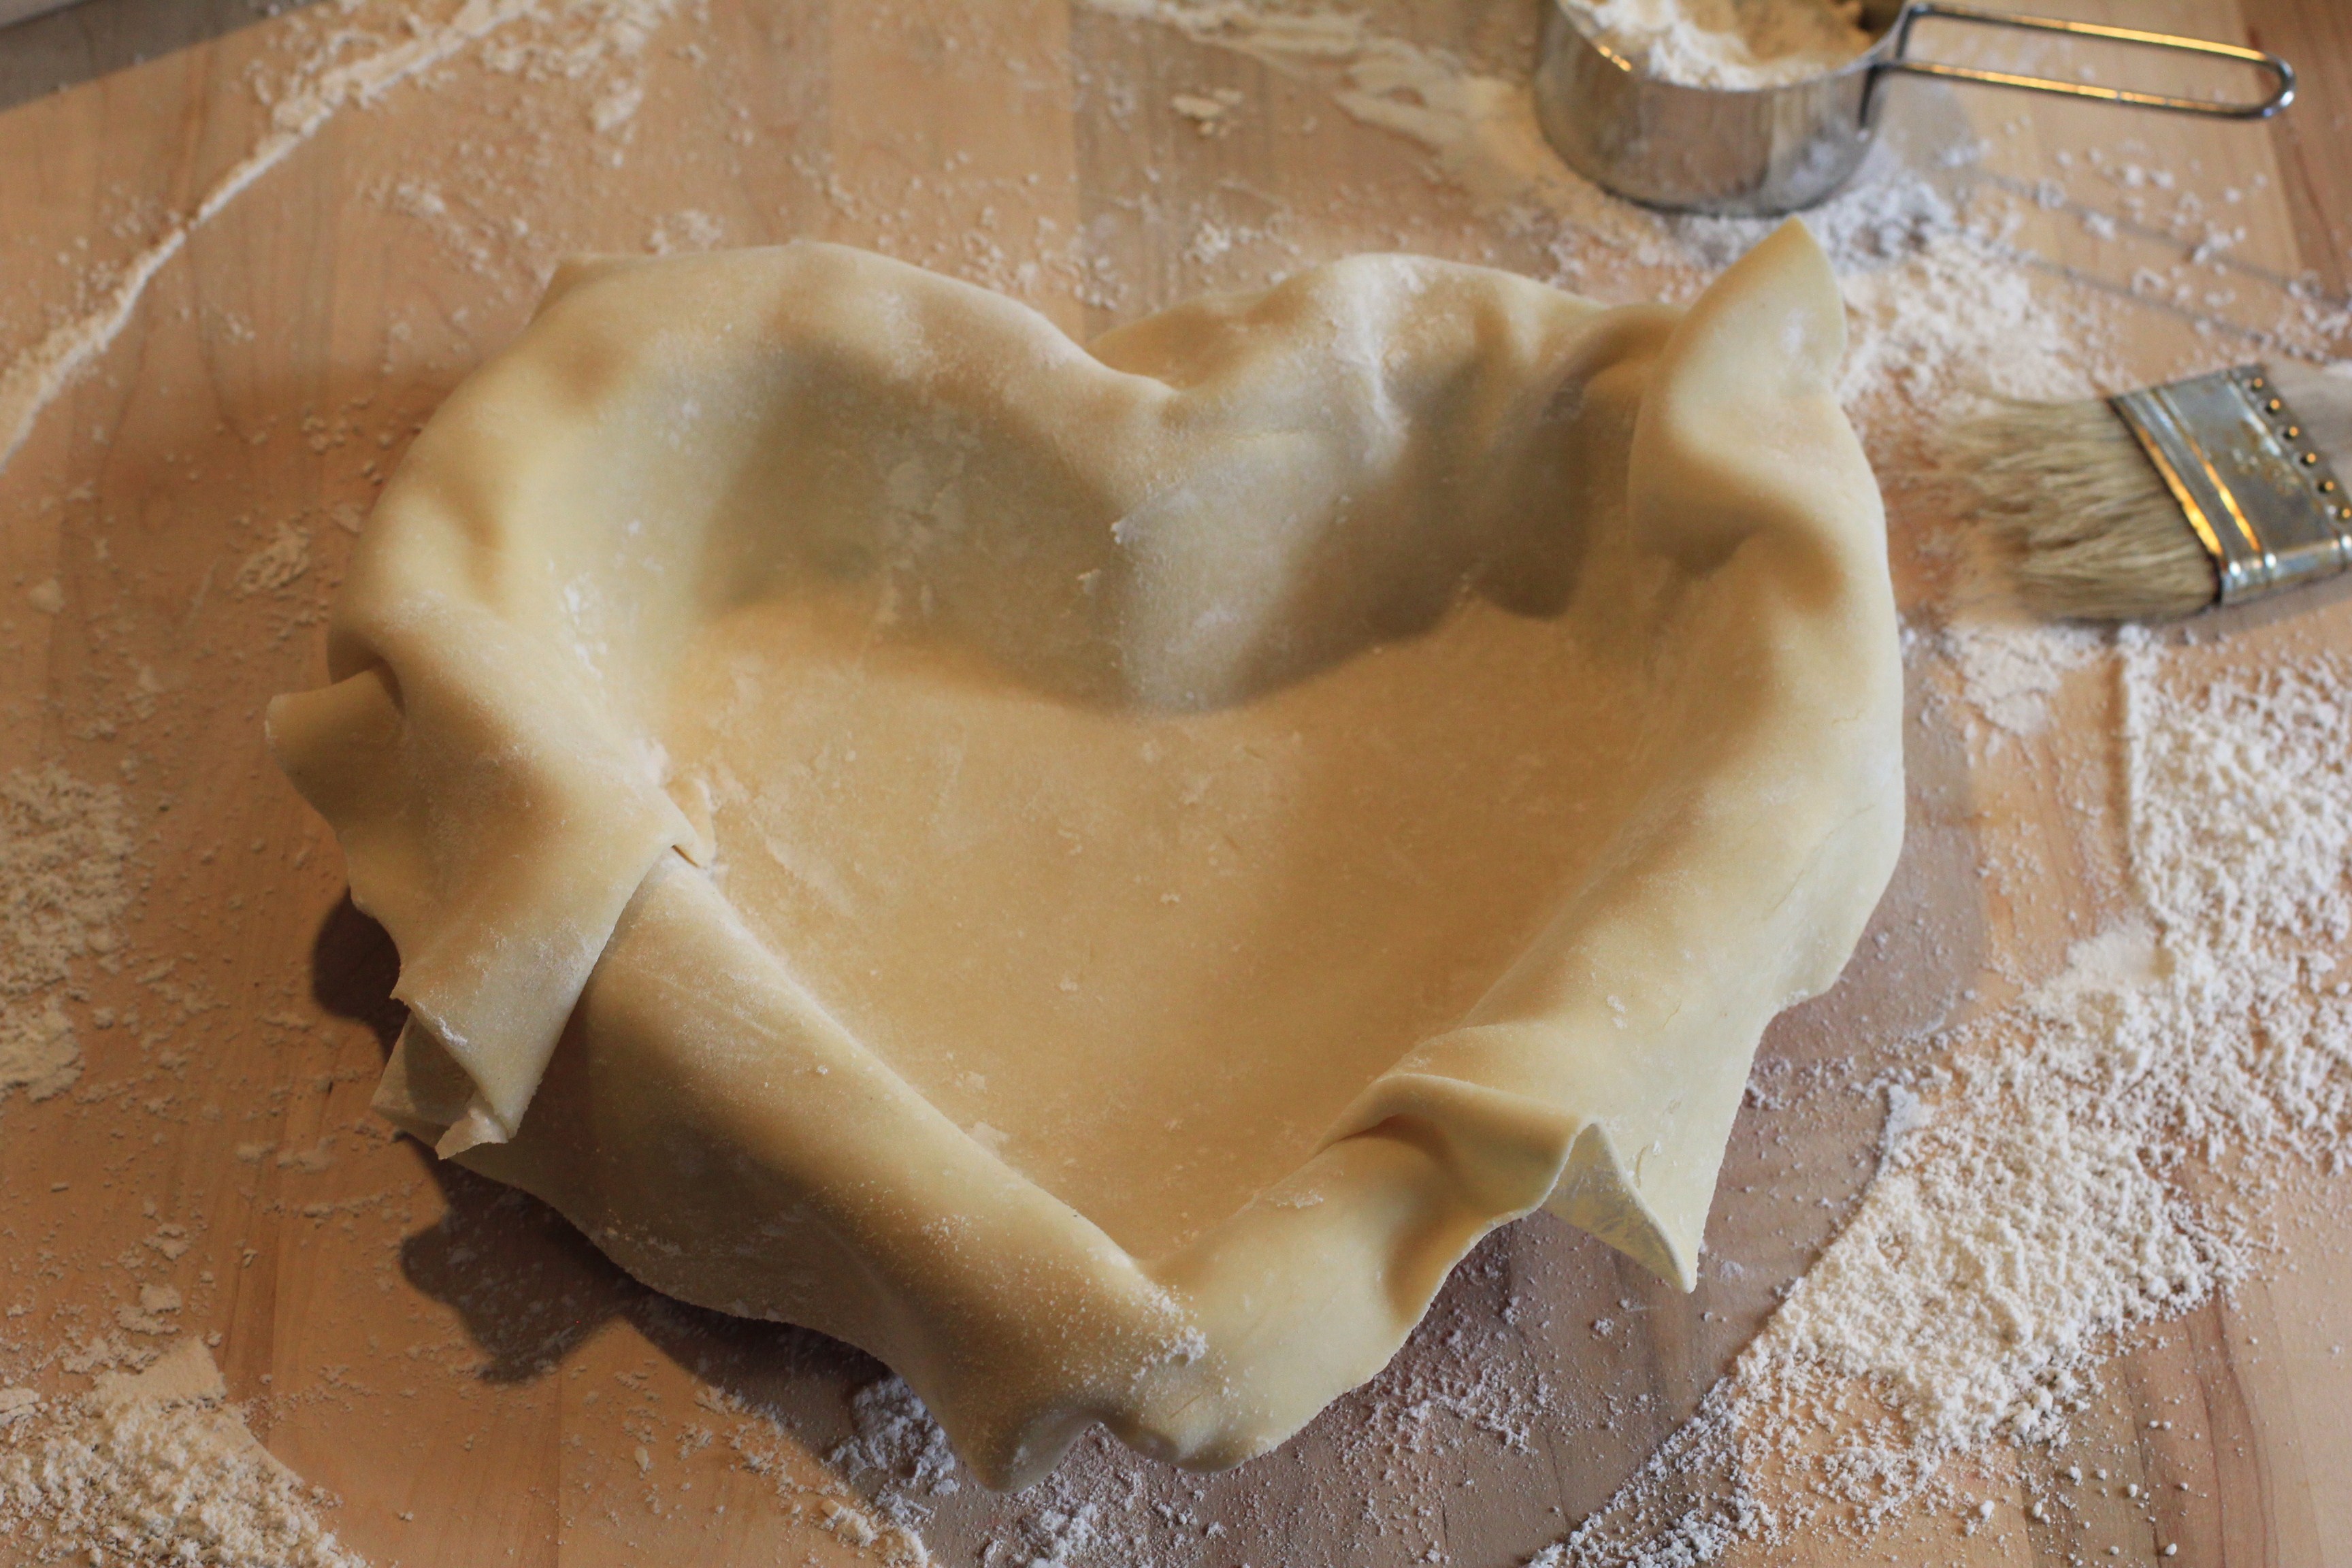 Last Minute Valentine’s Day Idea:  A Heart Shaped Homemade Apple Pie